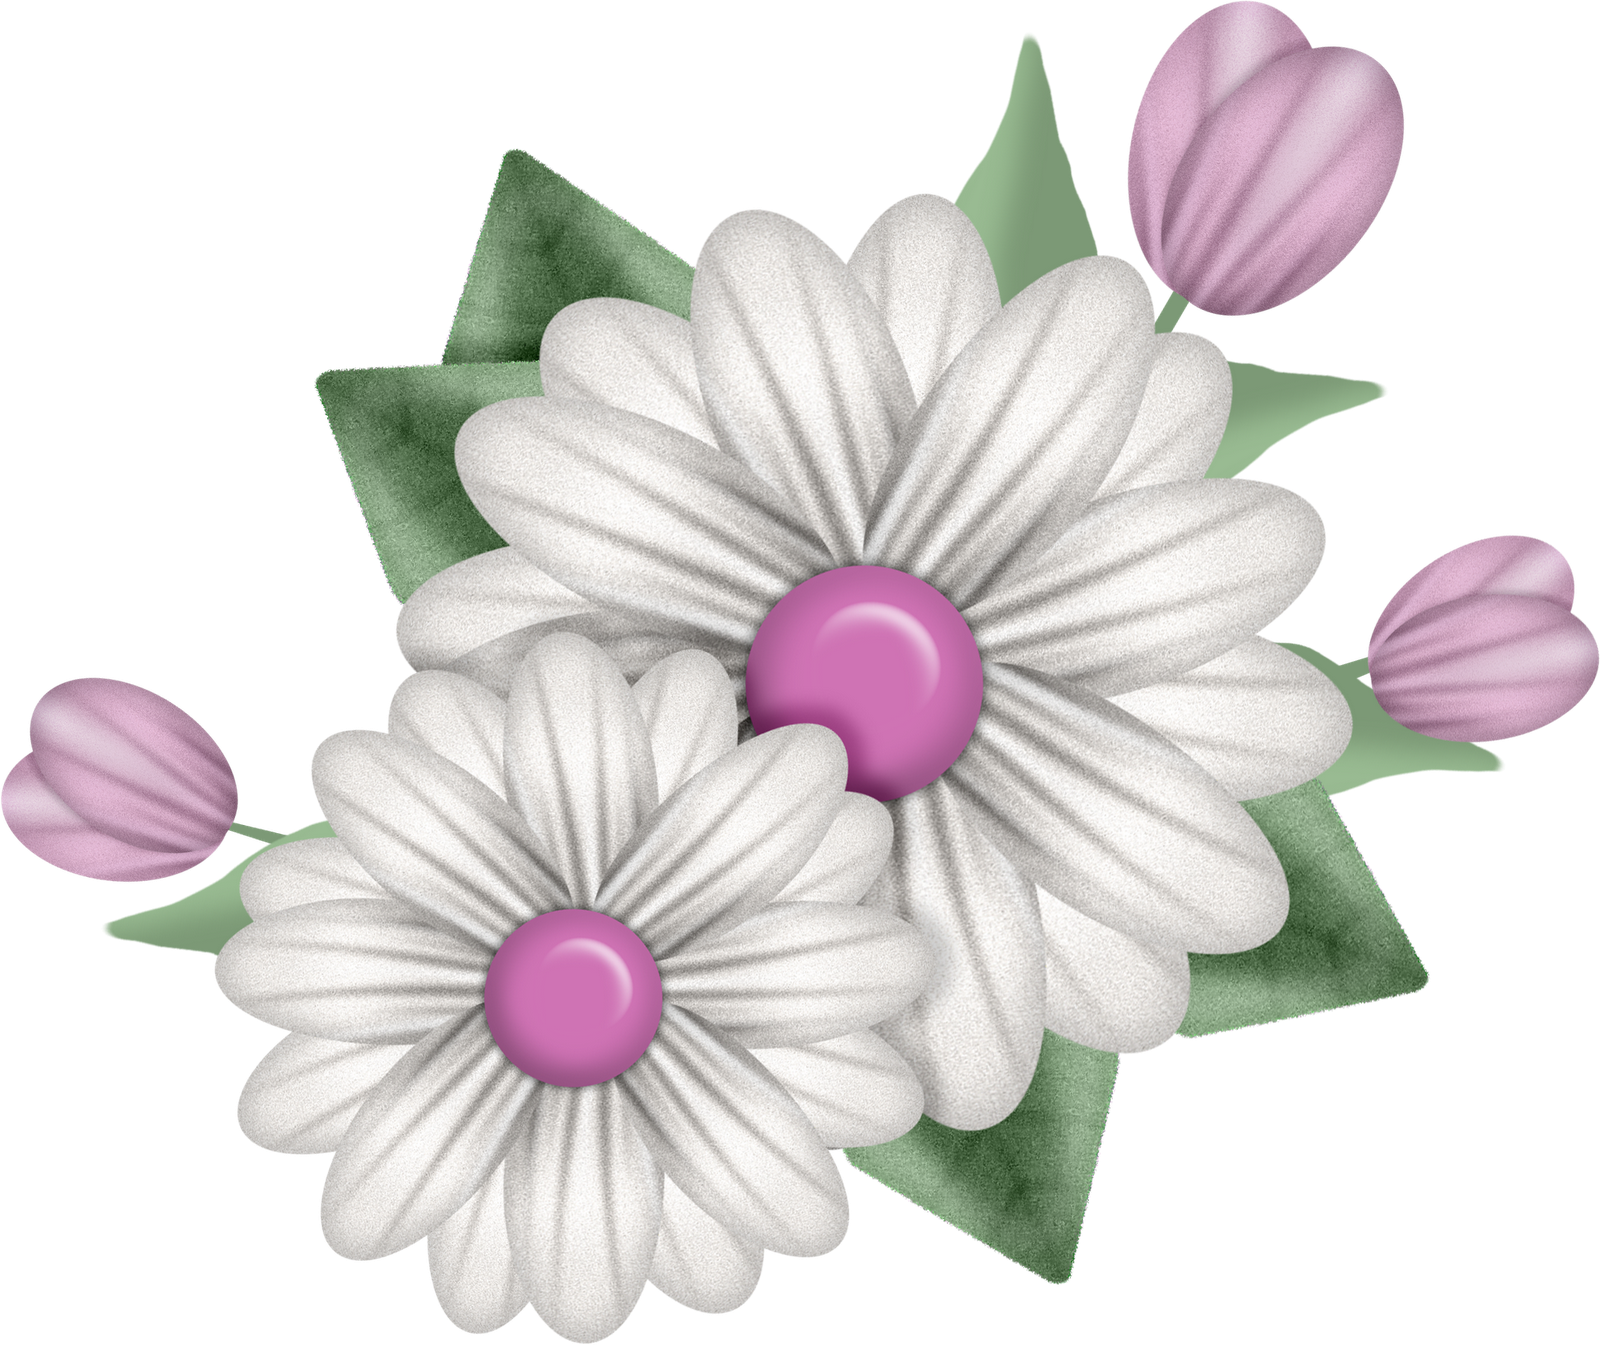 flower clipart for photoshop - photo #8